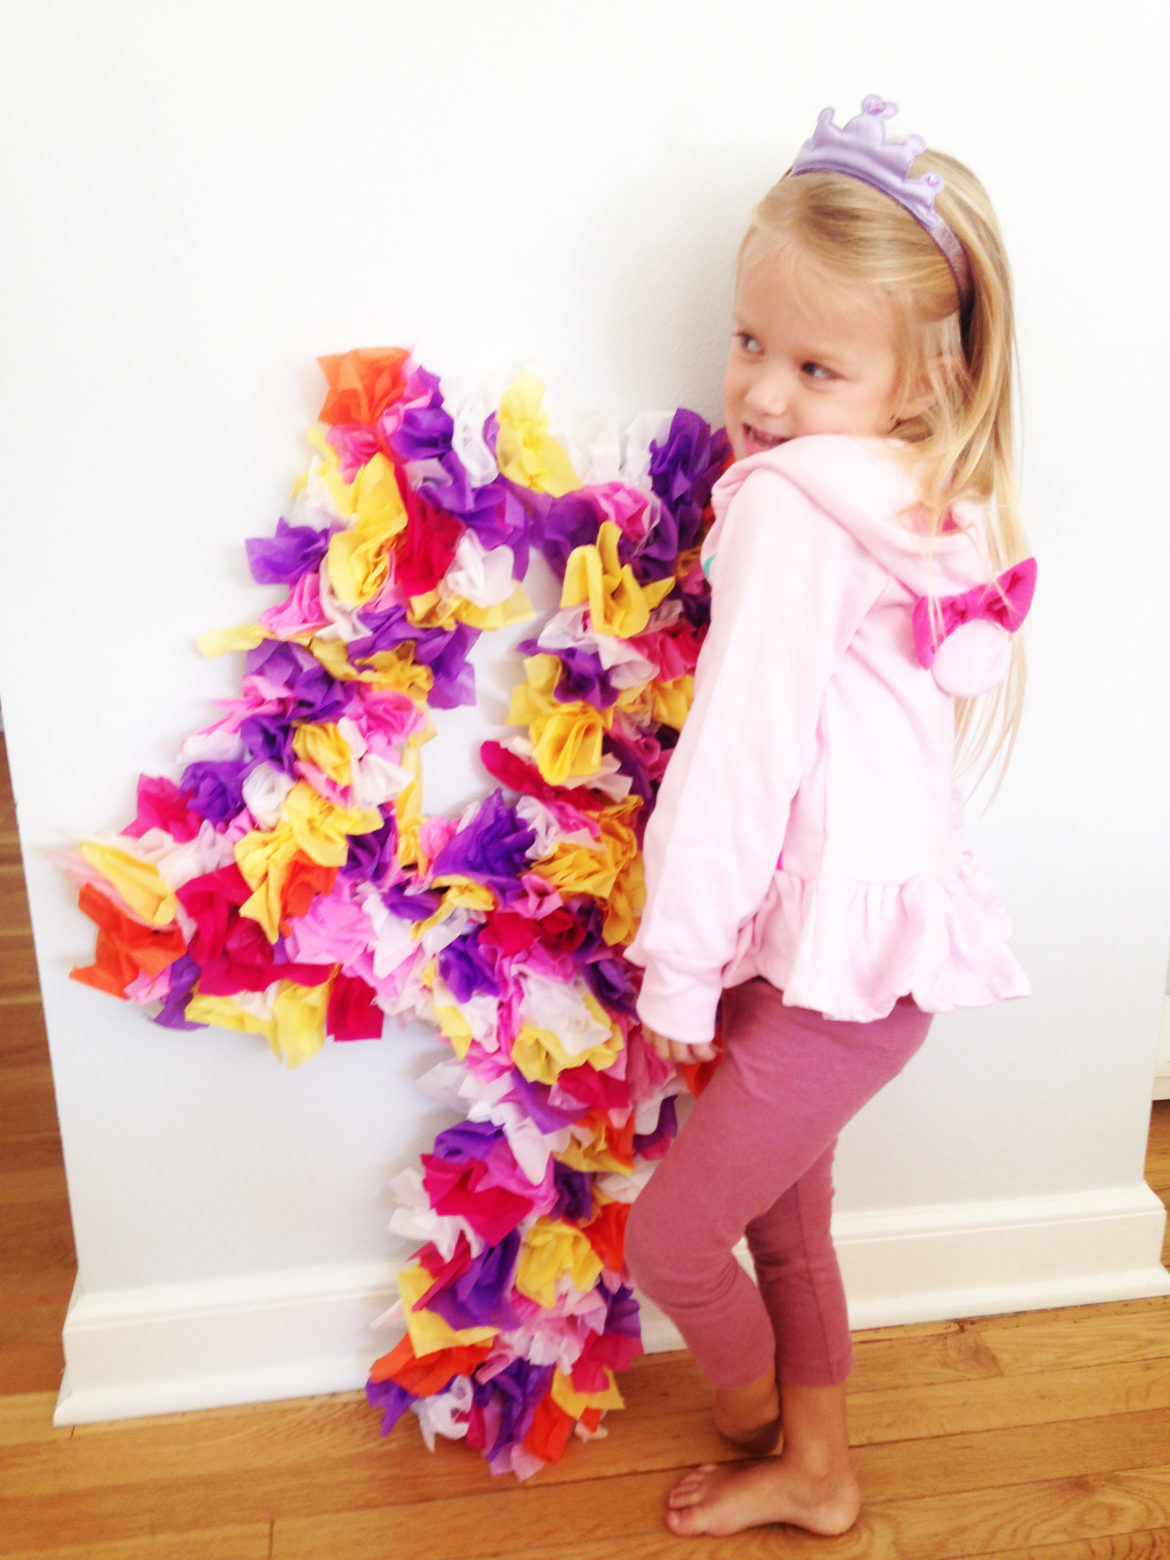 Creating a DIY tissue paper birthday number - a little kooky